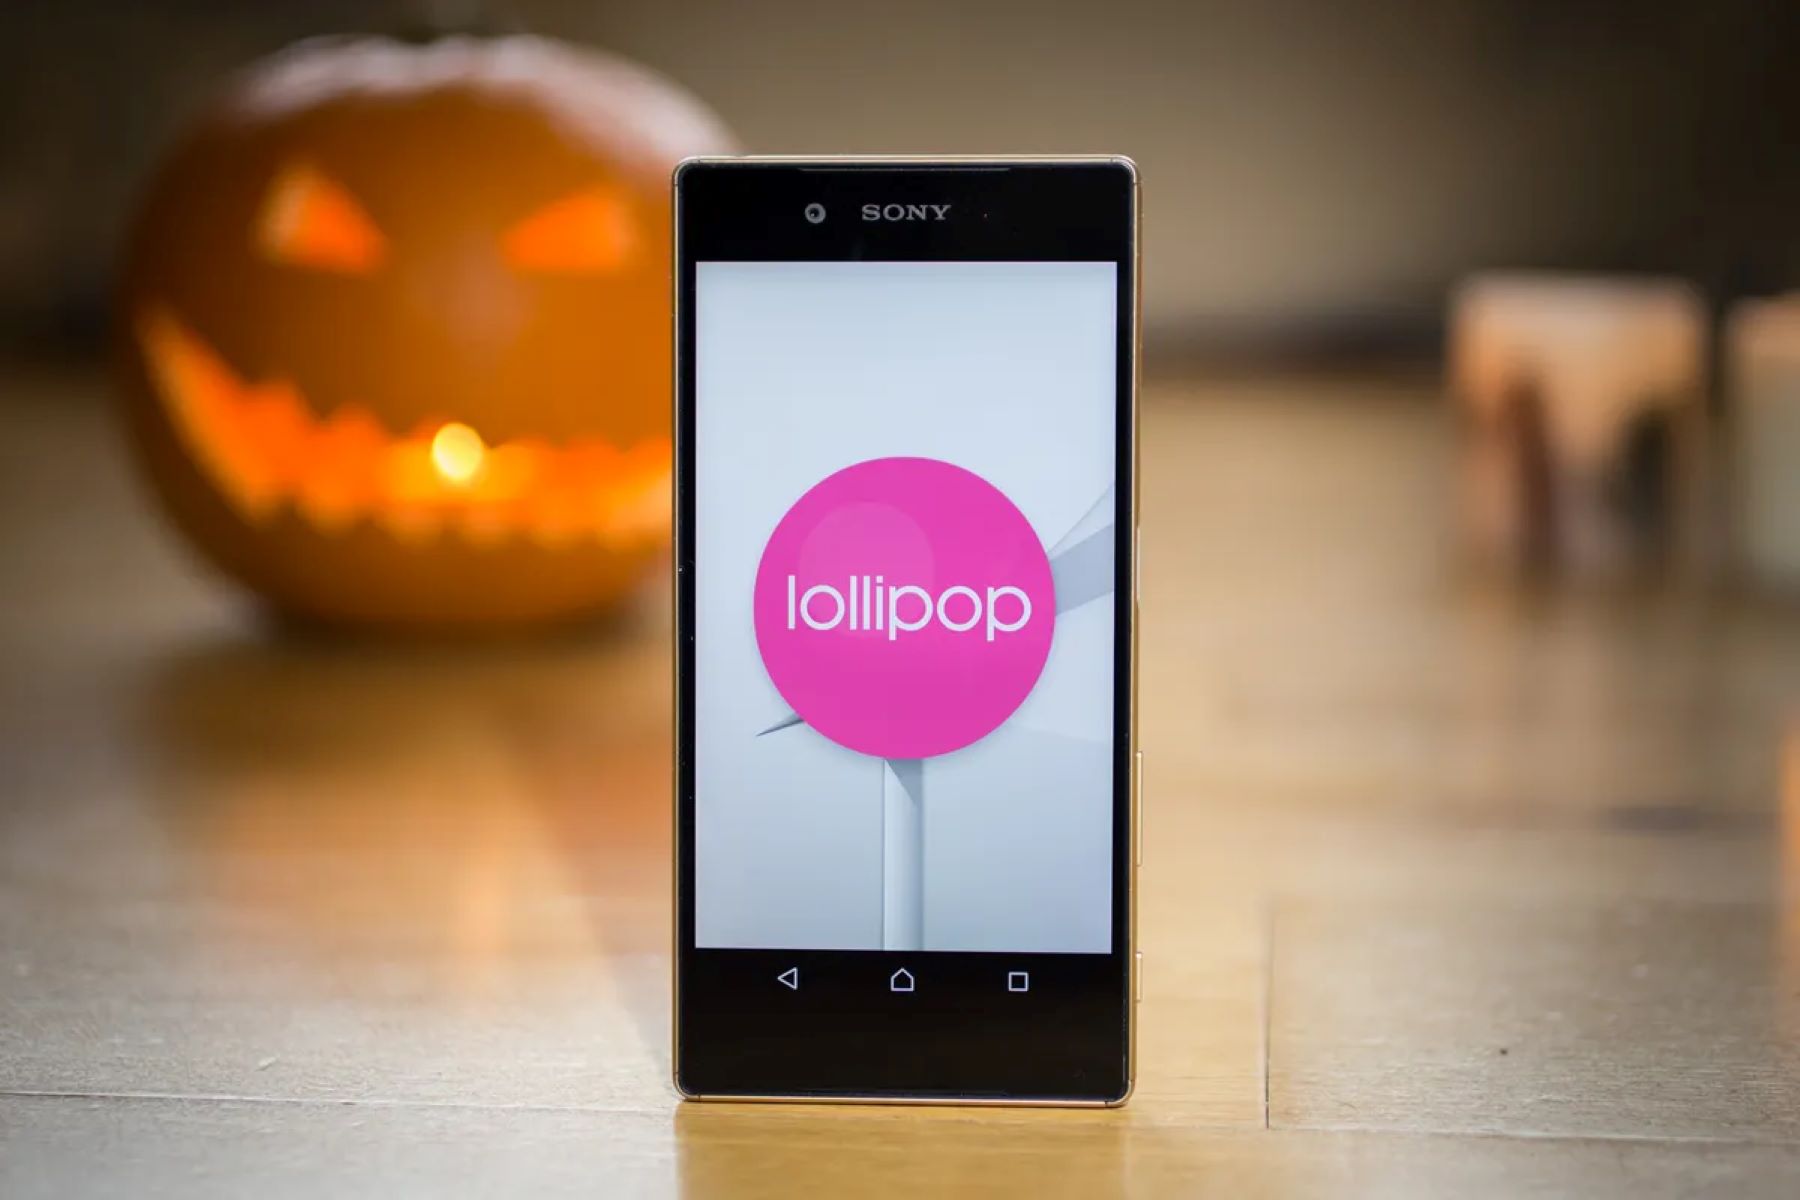 upgrading-sony-xperia-z-c6606-to-lollipop-a-step-by-step-guide